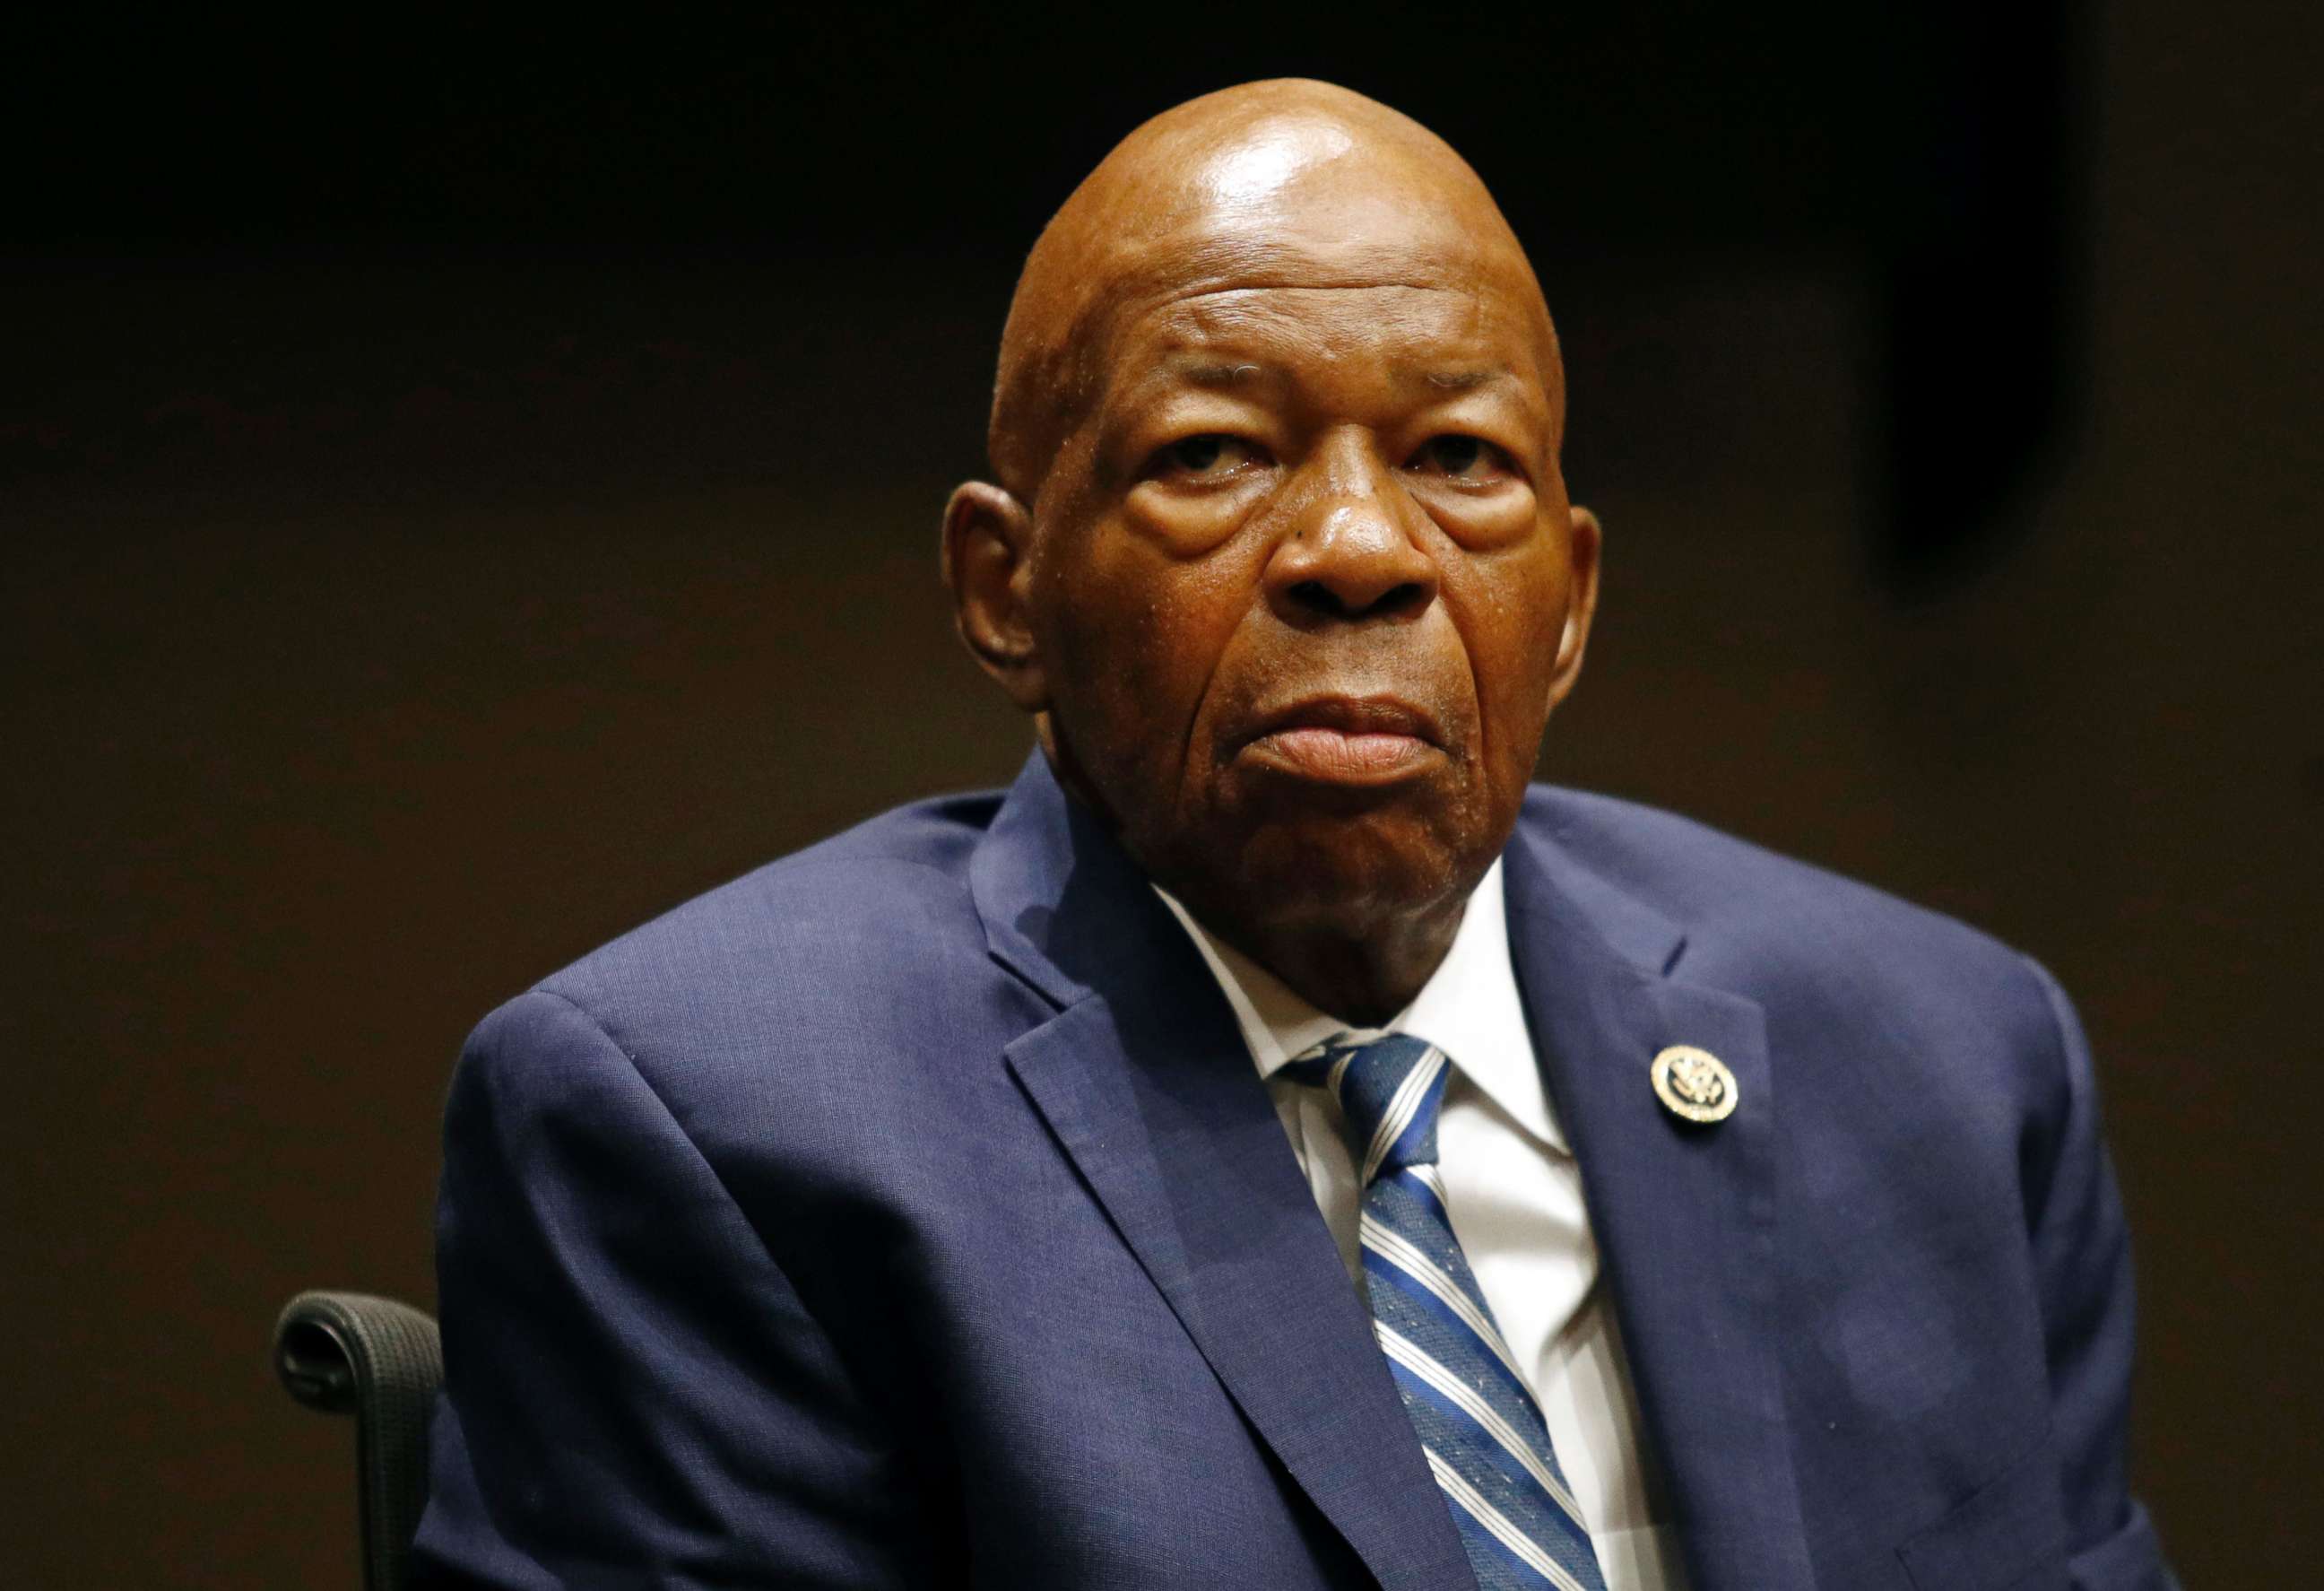 PHOTO: Rep. Elijah Cummings, participates in a panel discussion during a summit on the country's opioid epidemic at the Johns Hopkins Bloomberg School of Public Health in Baltimore, Oct. 2017.